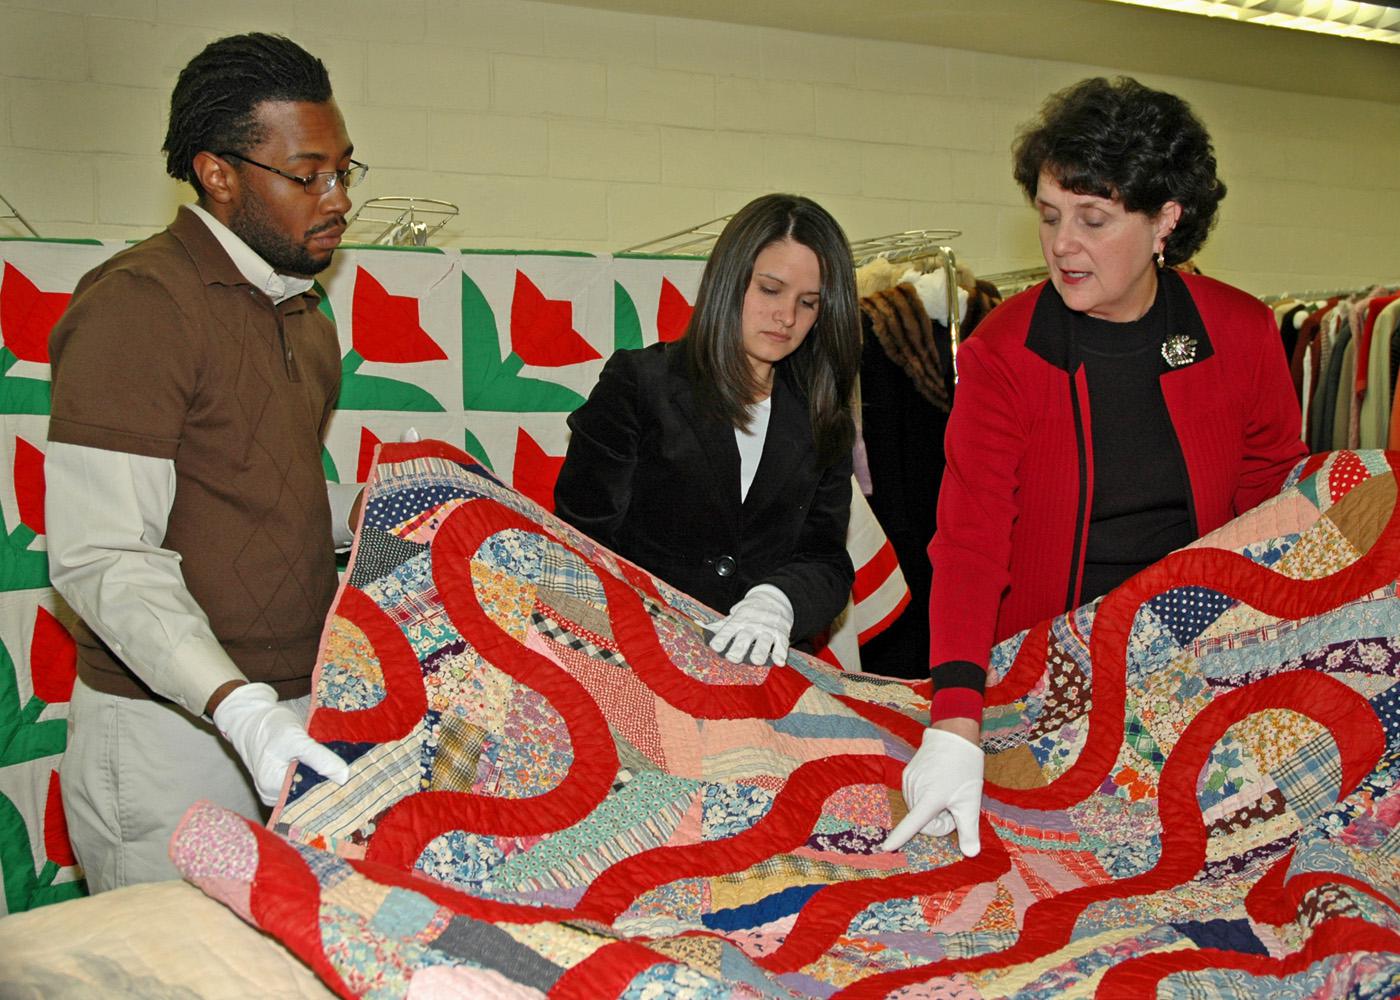 Mississippi State University students Parron Edwards (left), a junior from Lexington, and Shannon Sorro, a senior from Clarksville, Tenn., listen as Wanda Cheek, associate professor of human sciences, discusses the intricacies of quilts and their patterns.